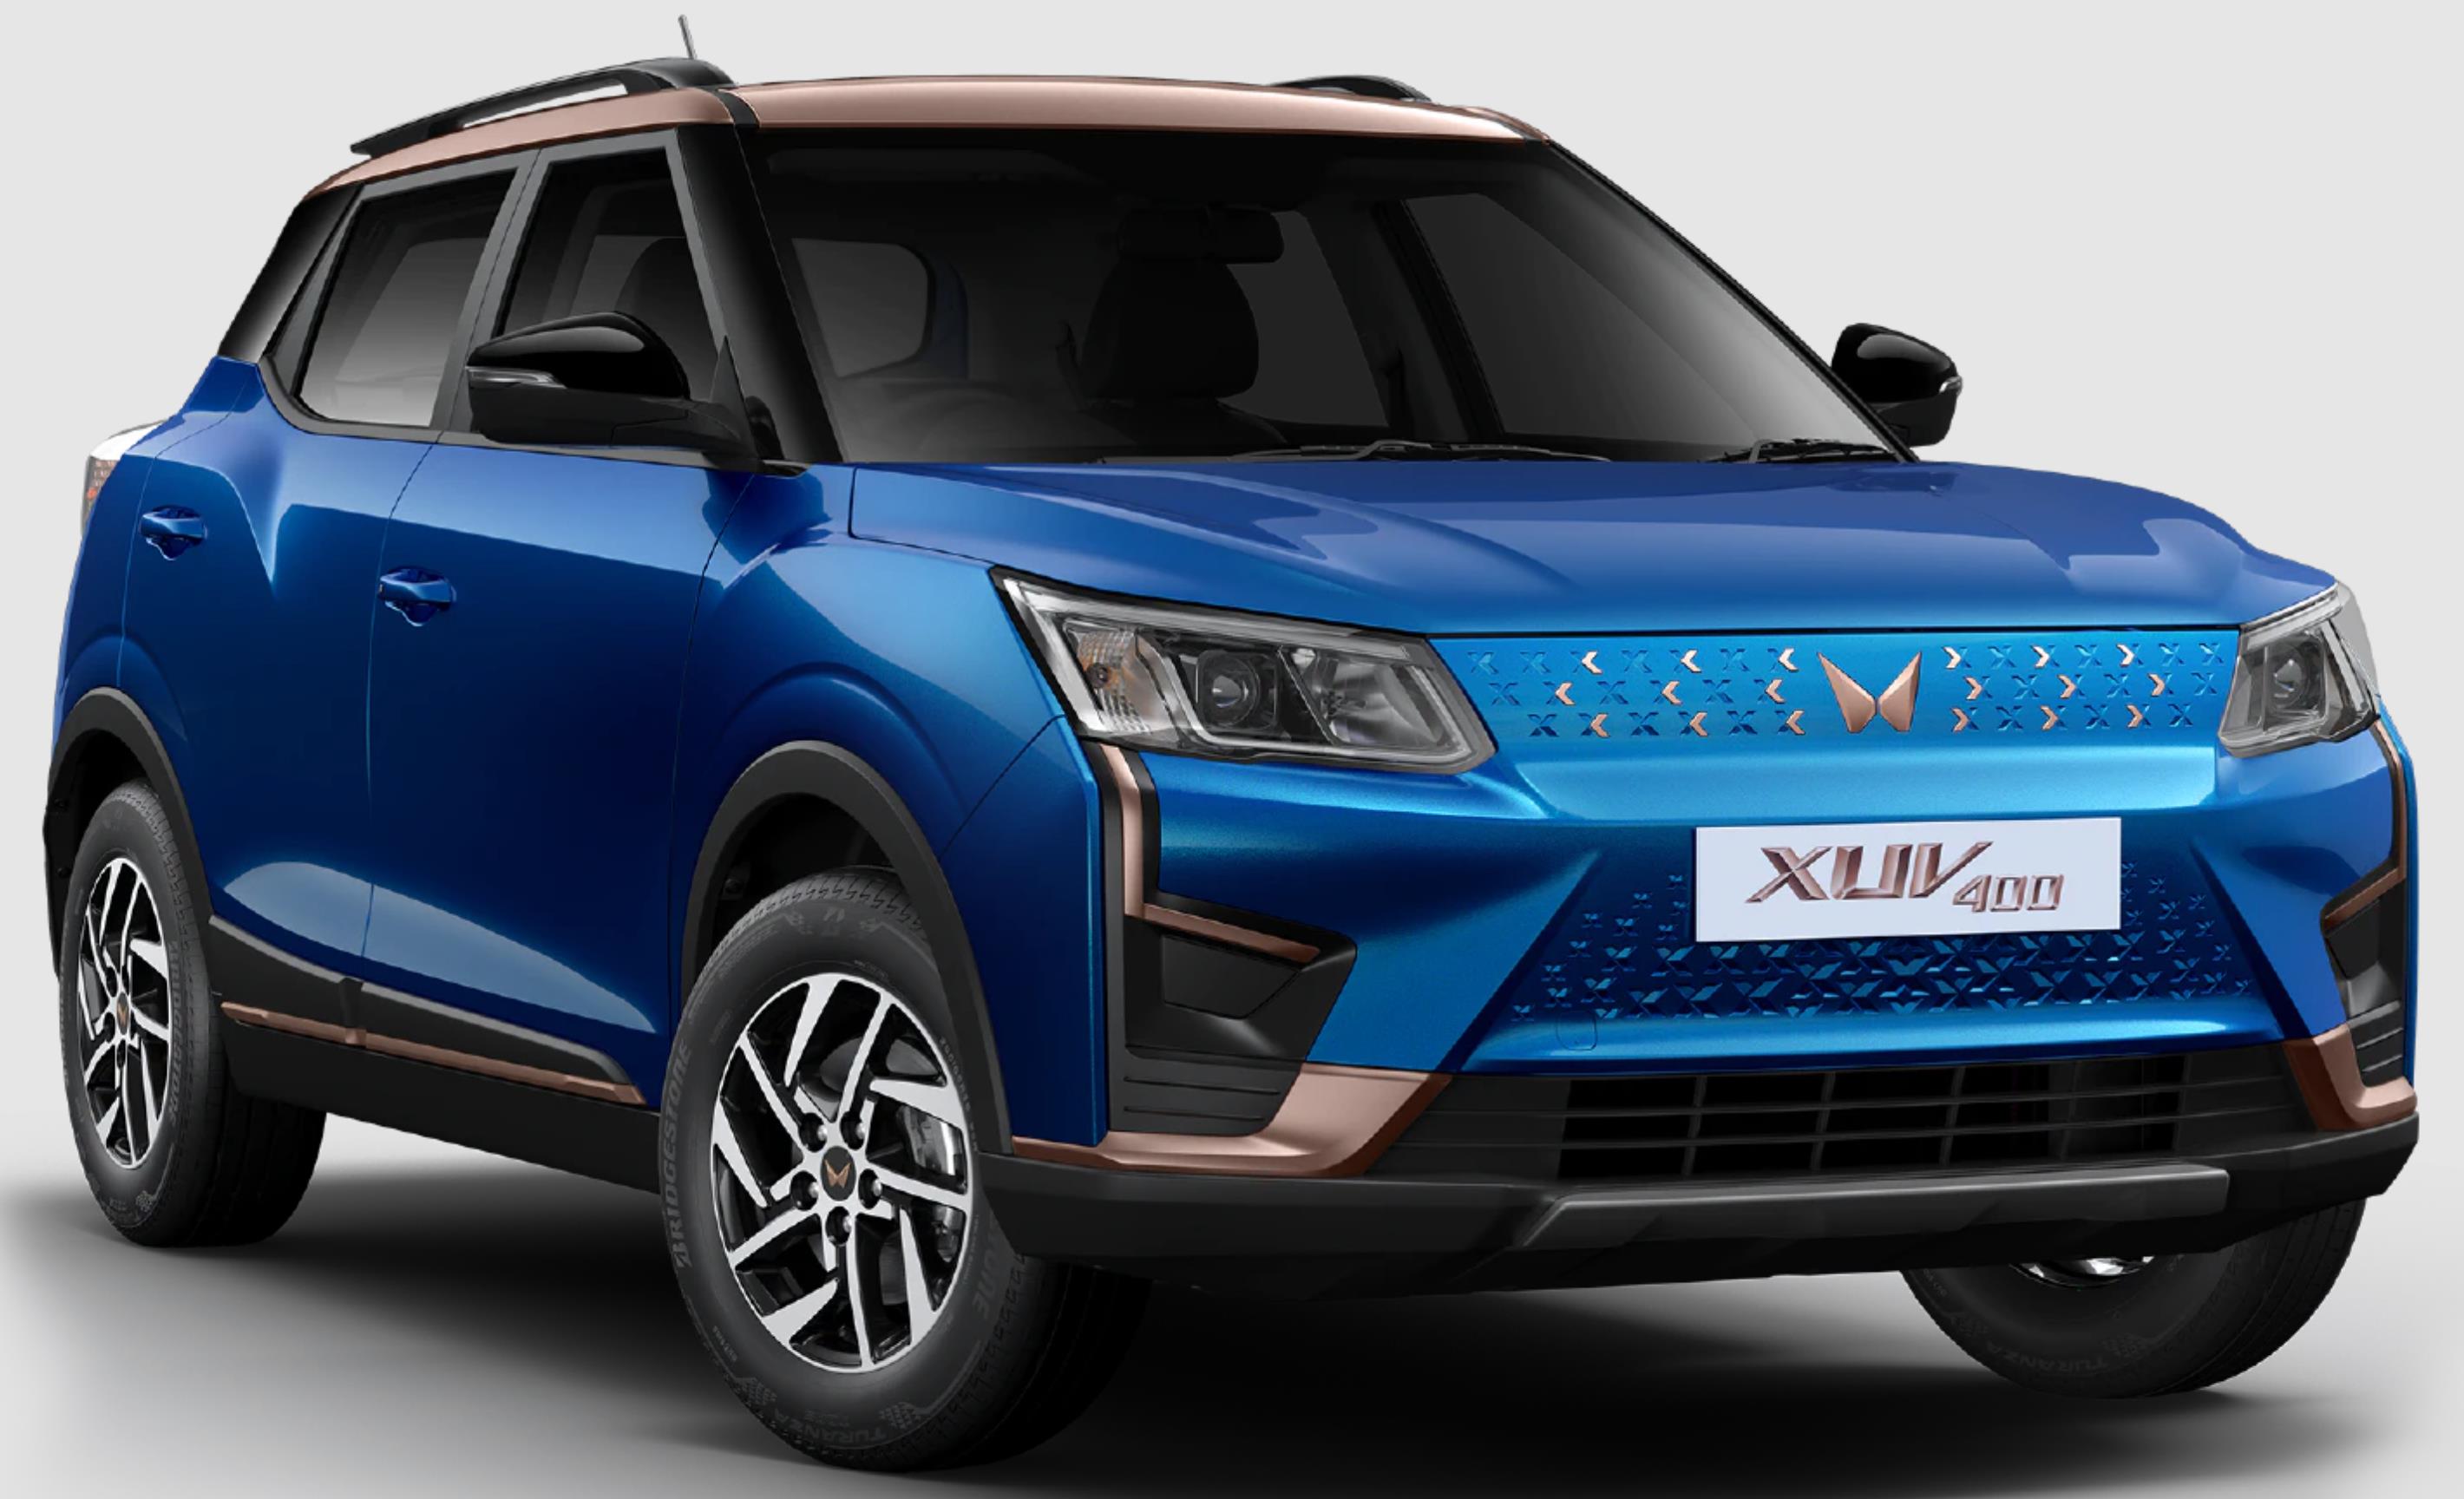 Mahindra Electric XUV400 Price, Specs, Review, Pics & Mileage in India